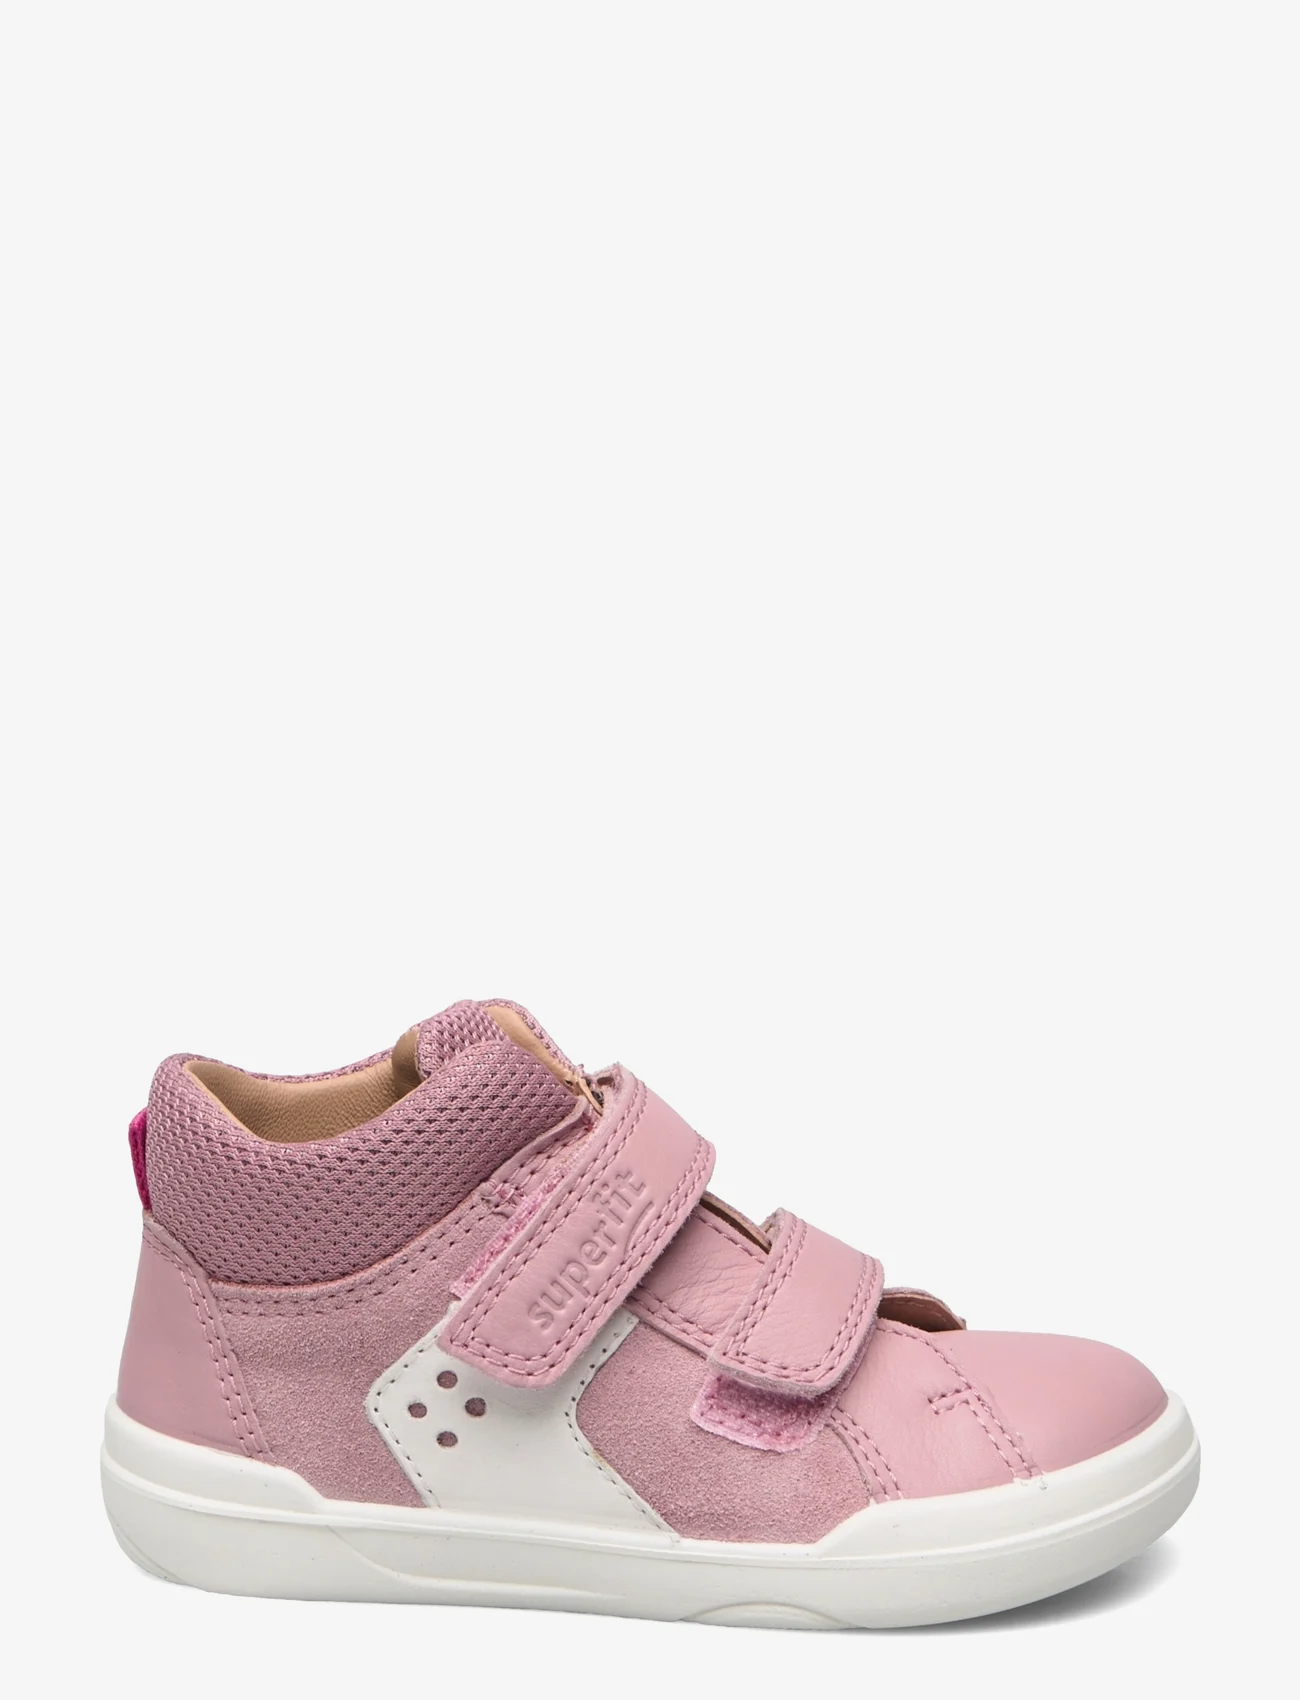 Superfit - SUPERFREE - high tops - rose/white - 1